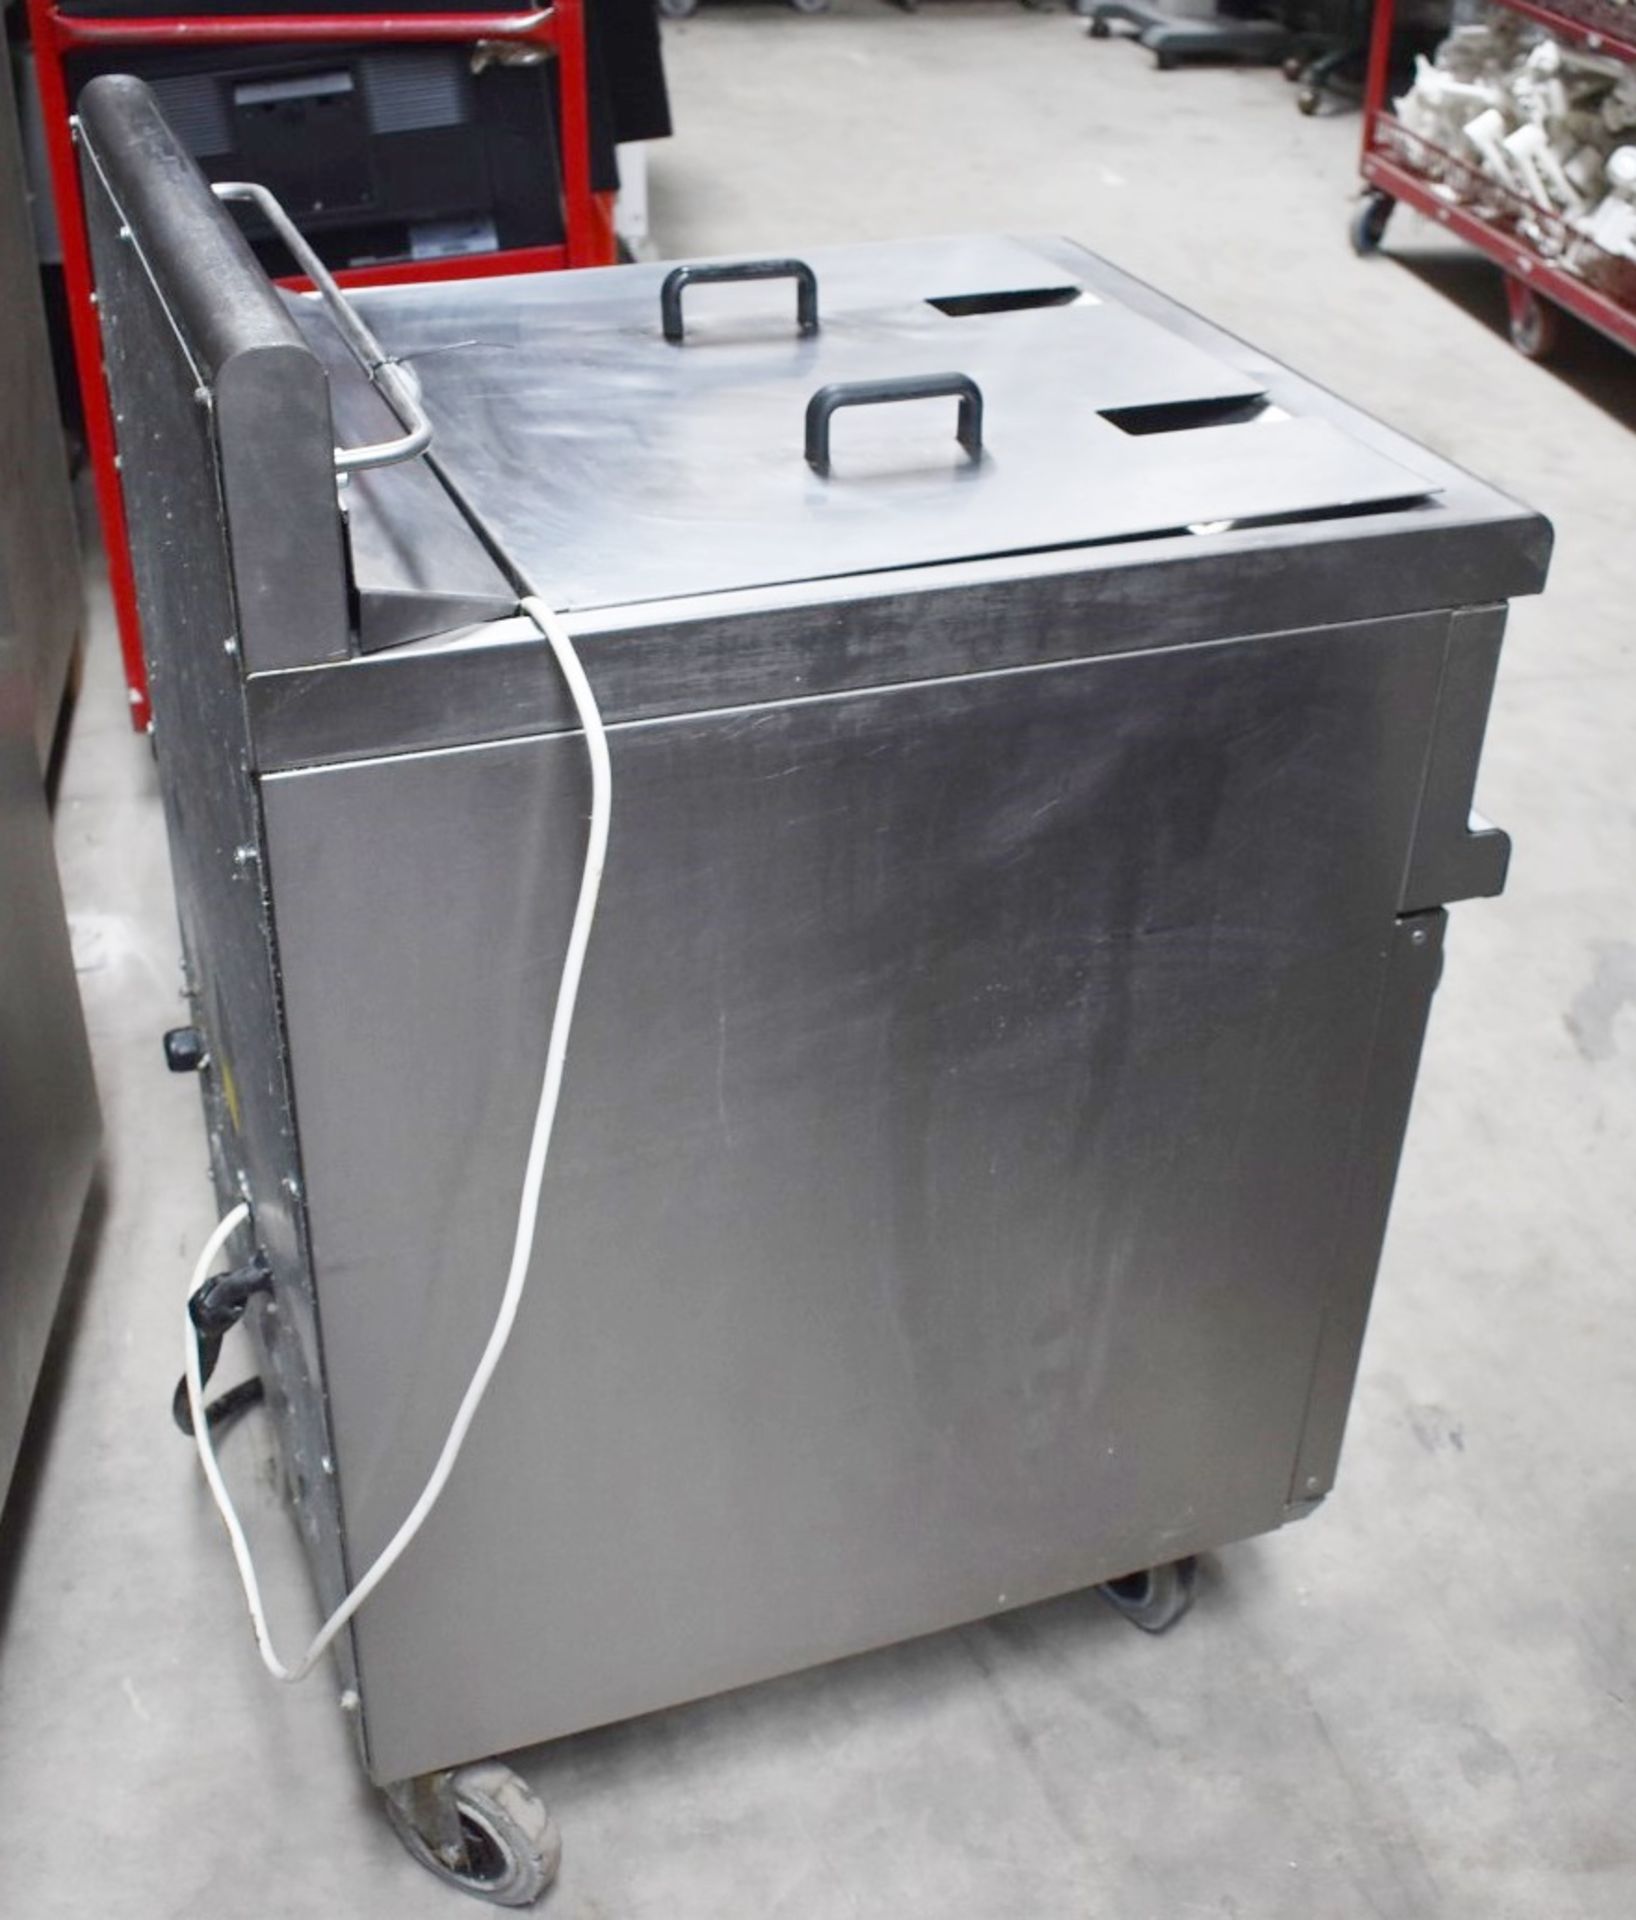 1 x Lincat Opus 700 Single Tank Electric Fryer With Built In Filtration - 3 Phase - Image 3 of 19